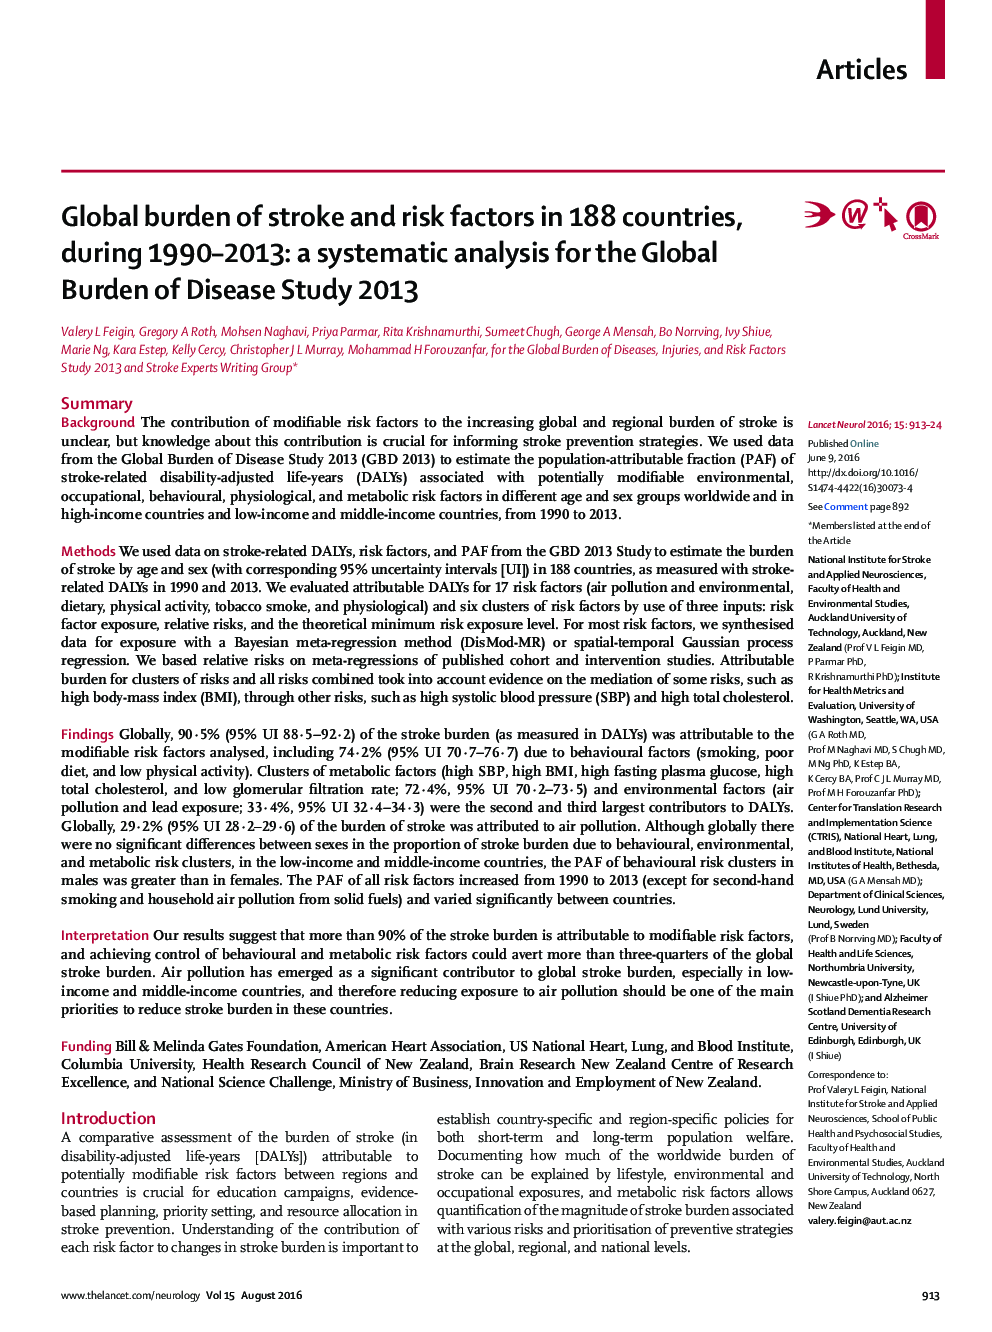 Global burden of stroke and risk factors in 188 countries, during 1990–2013: a systematic analysis for the Global Burden of Disease Study 2013